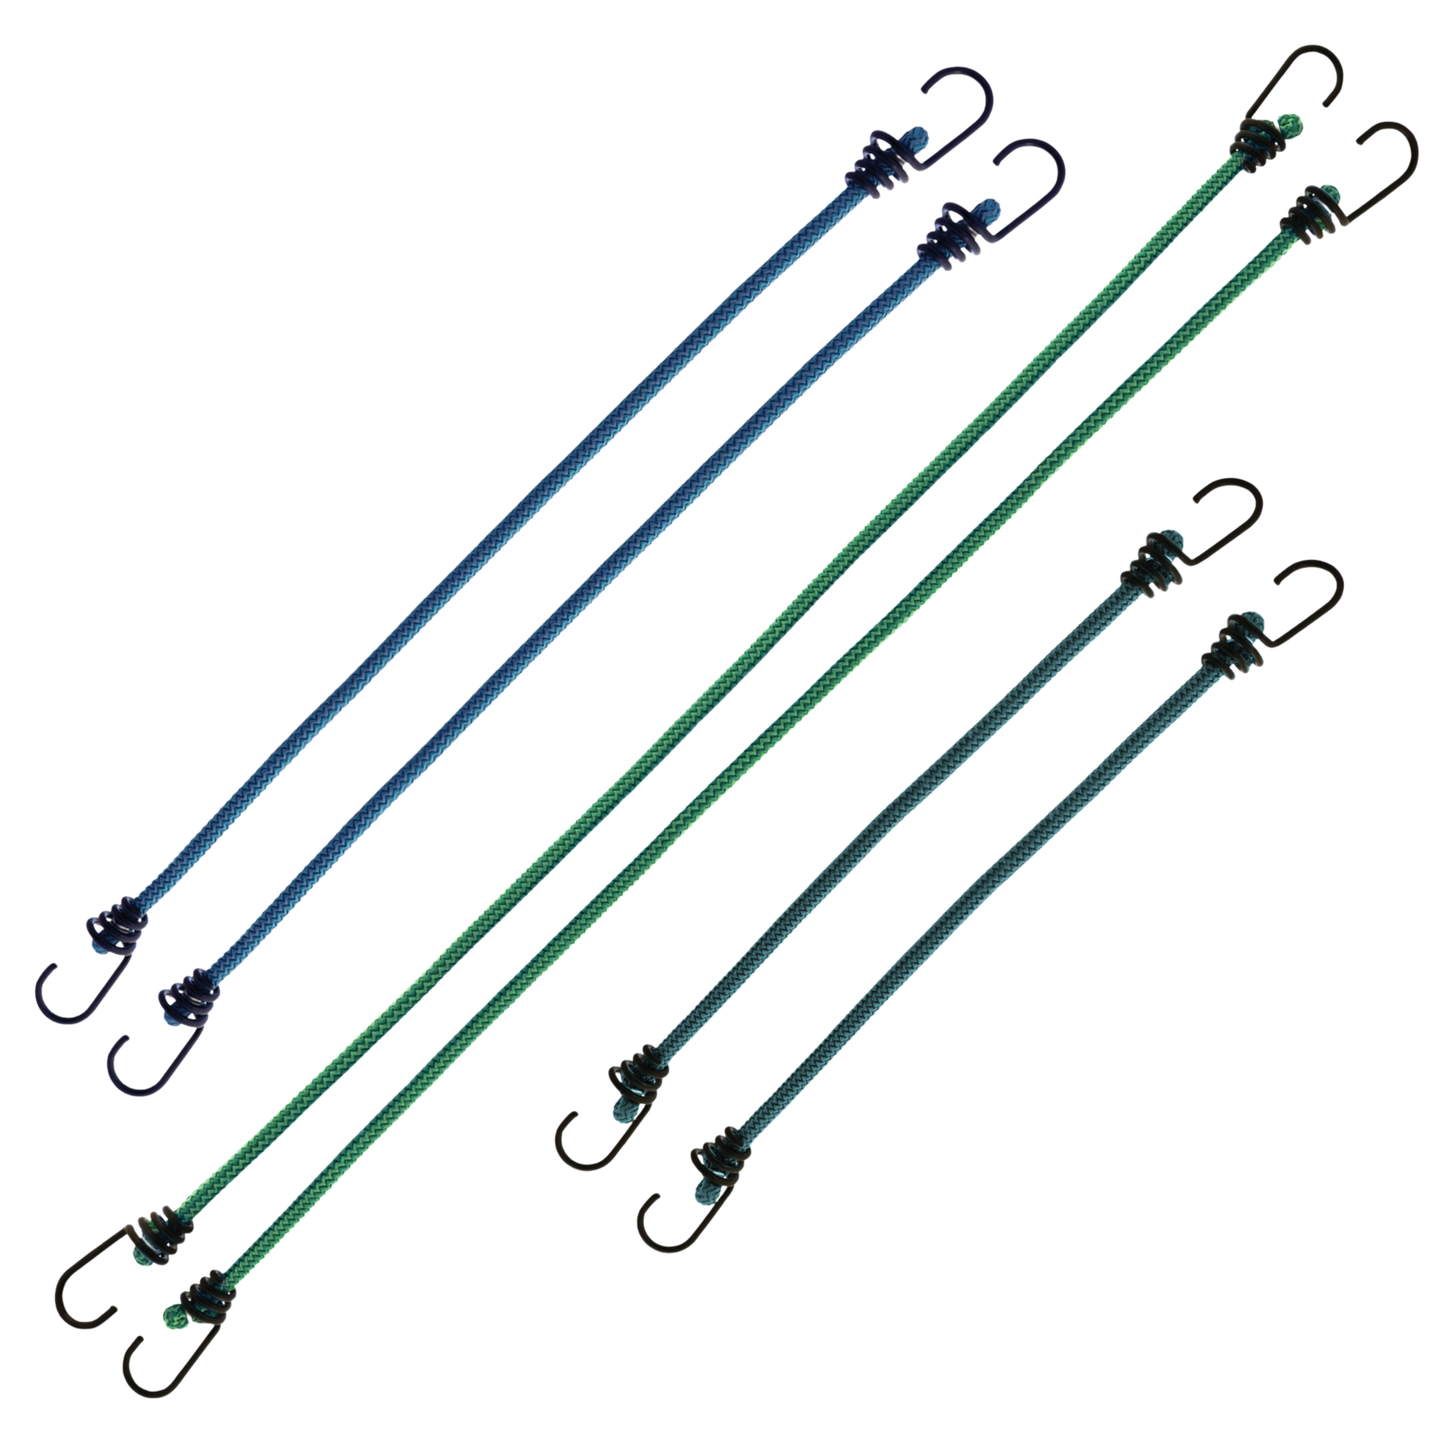 Assorted Bungee Cords - 6 Pack